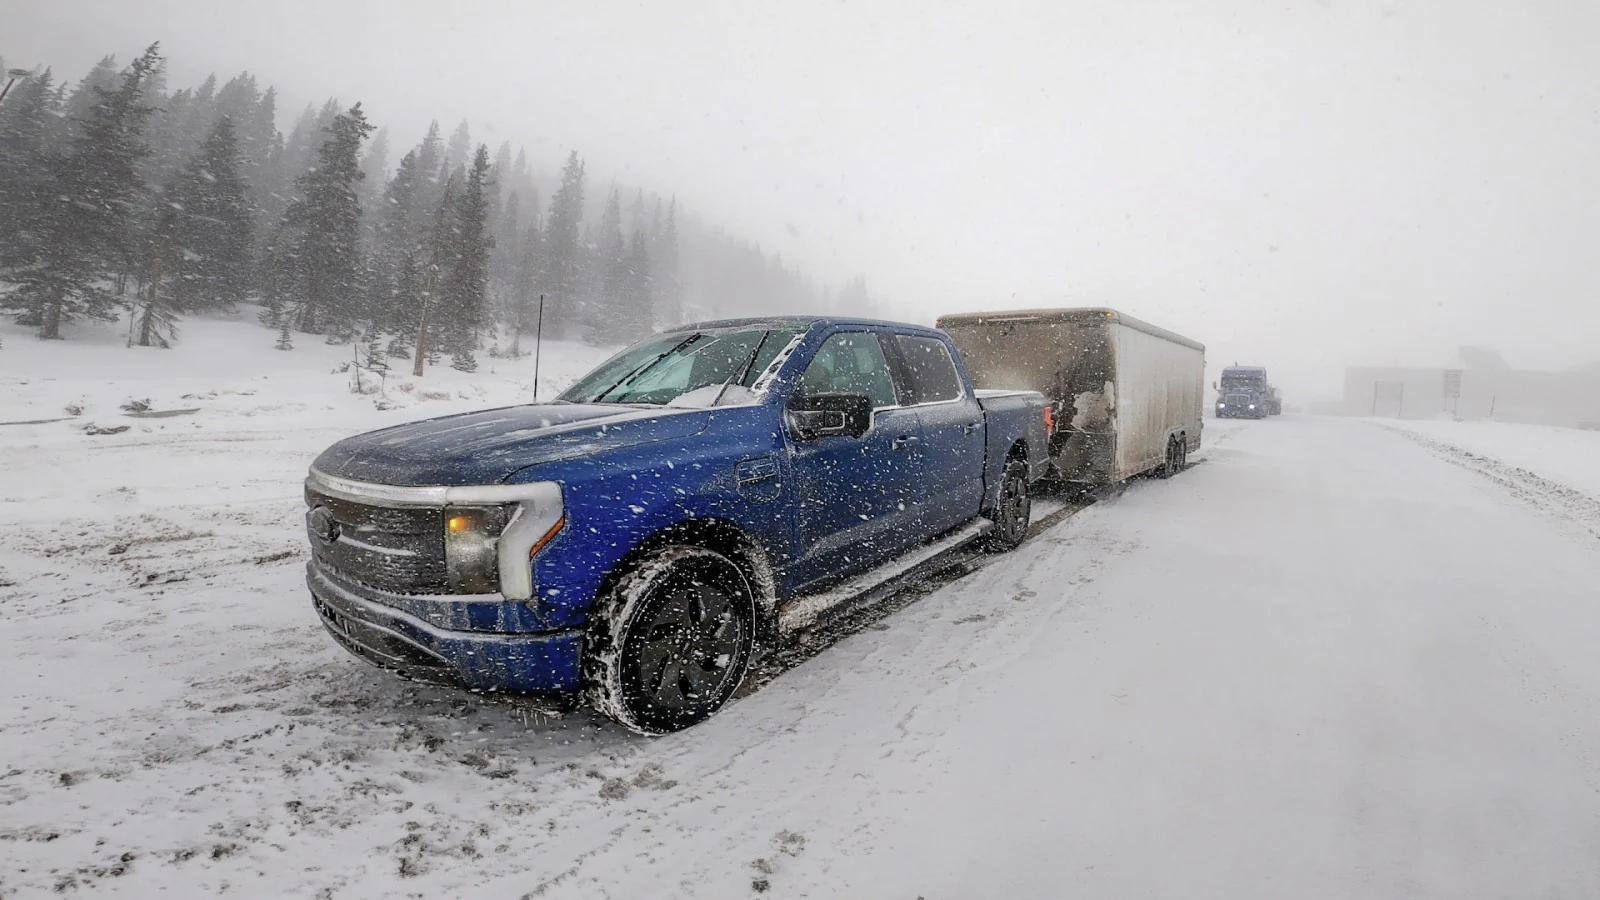 F-150 Lightning towing a trailer in snow